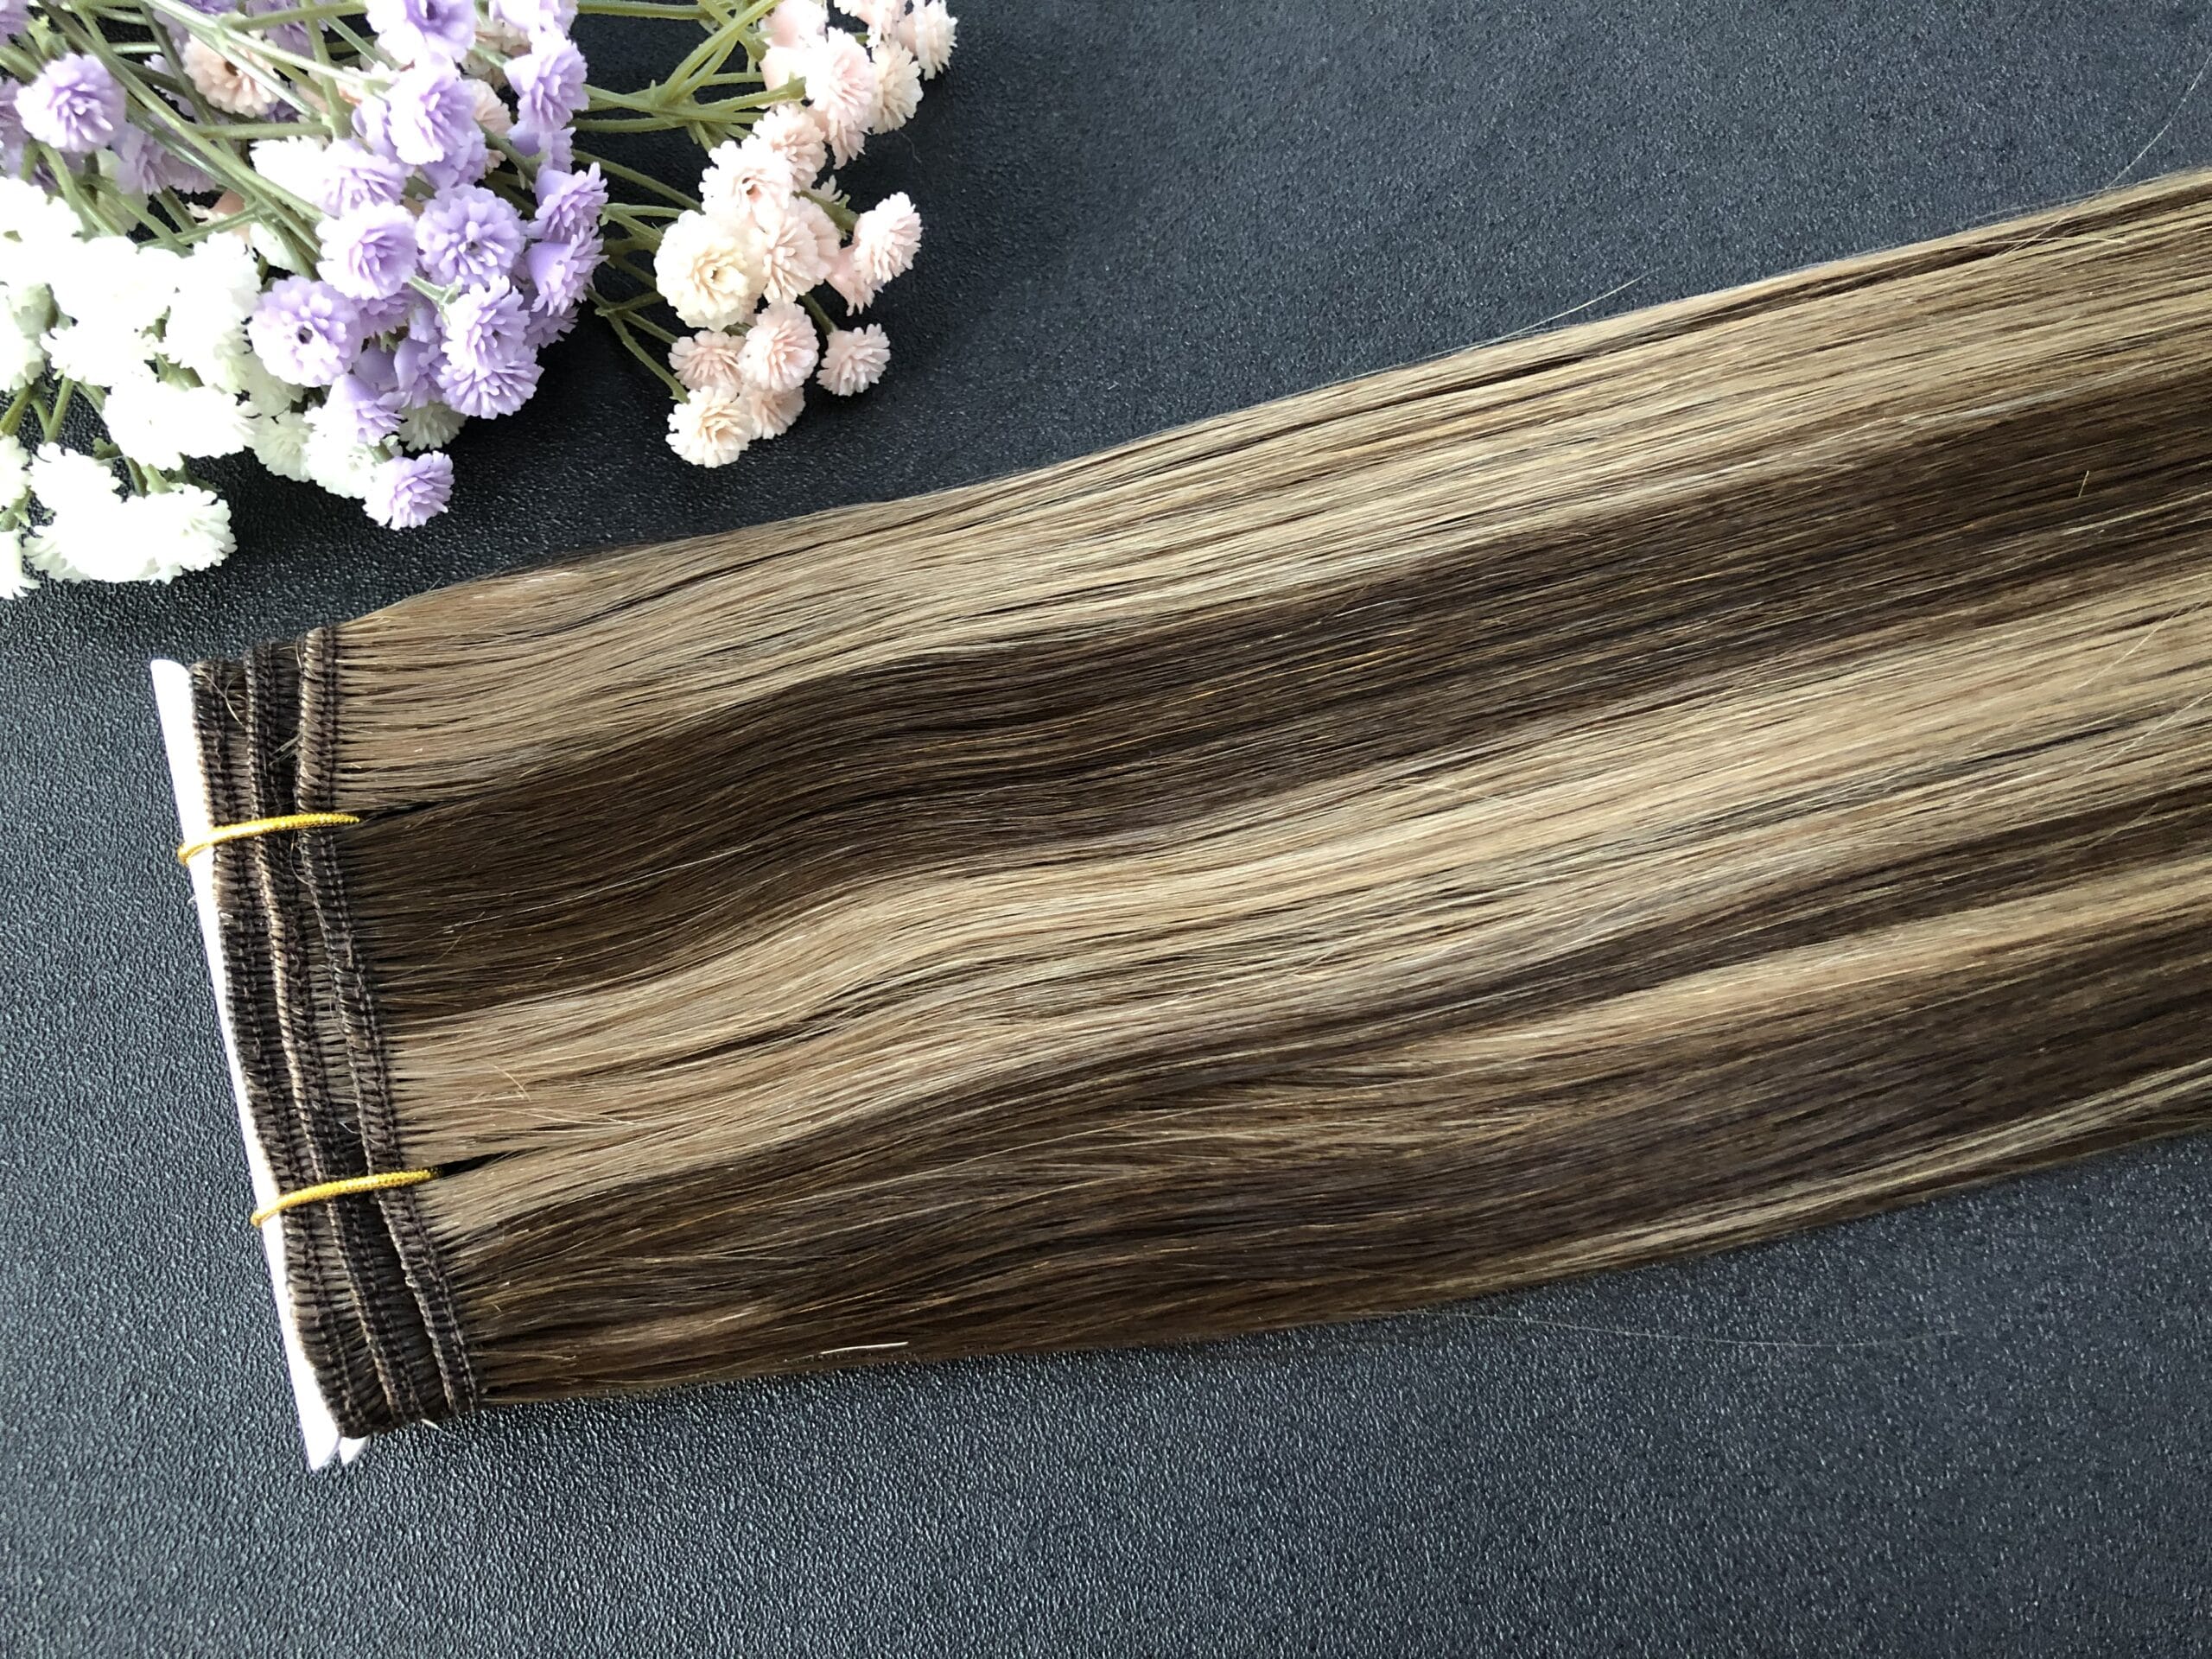 Wholesale Large Stock One Donor Virgin Hair Super Double Drawn Handtied Weft Hair Extensions